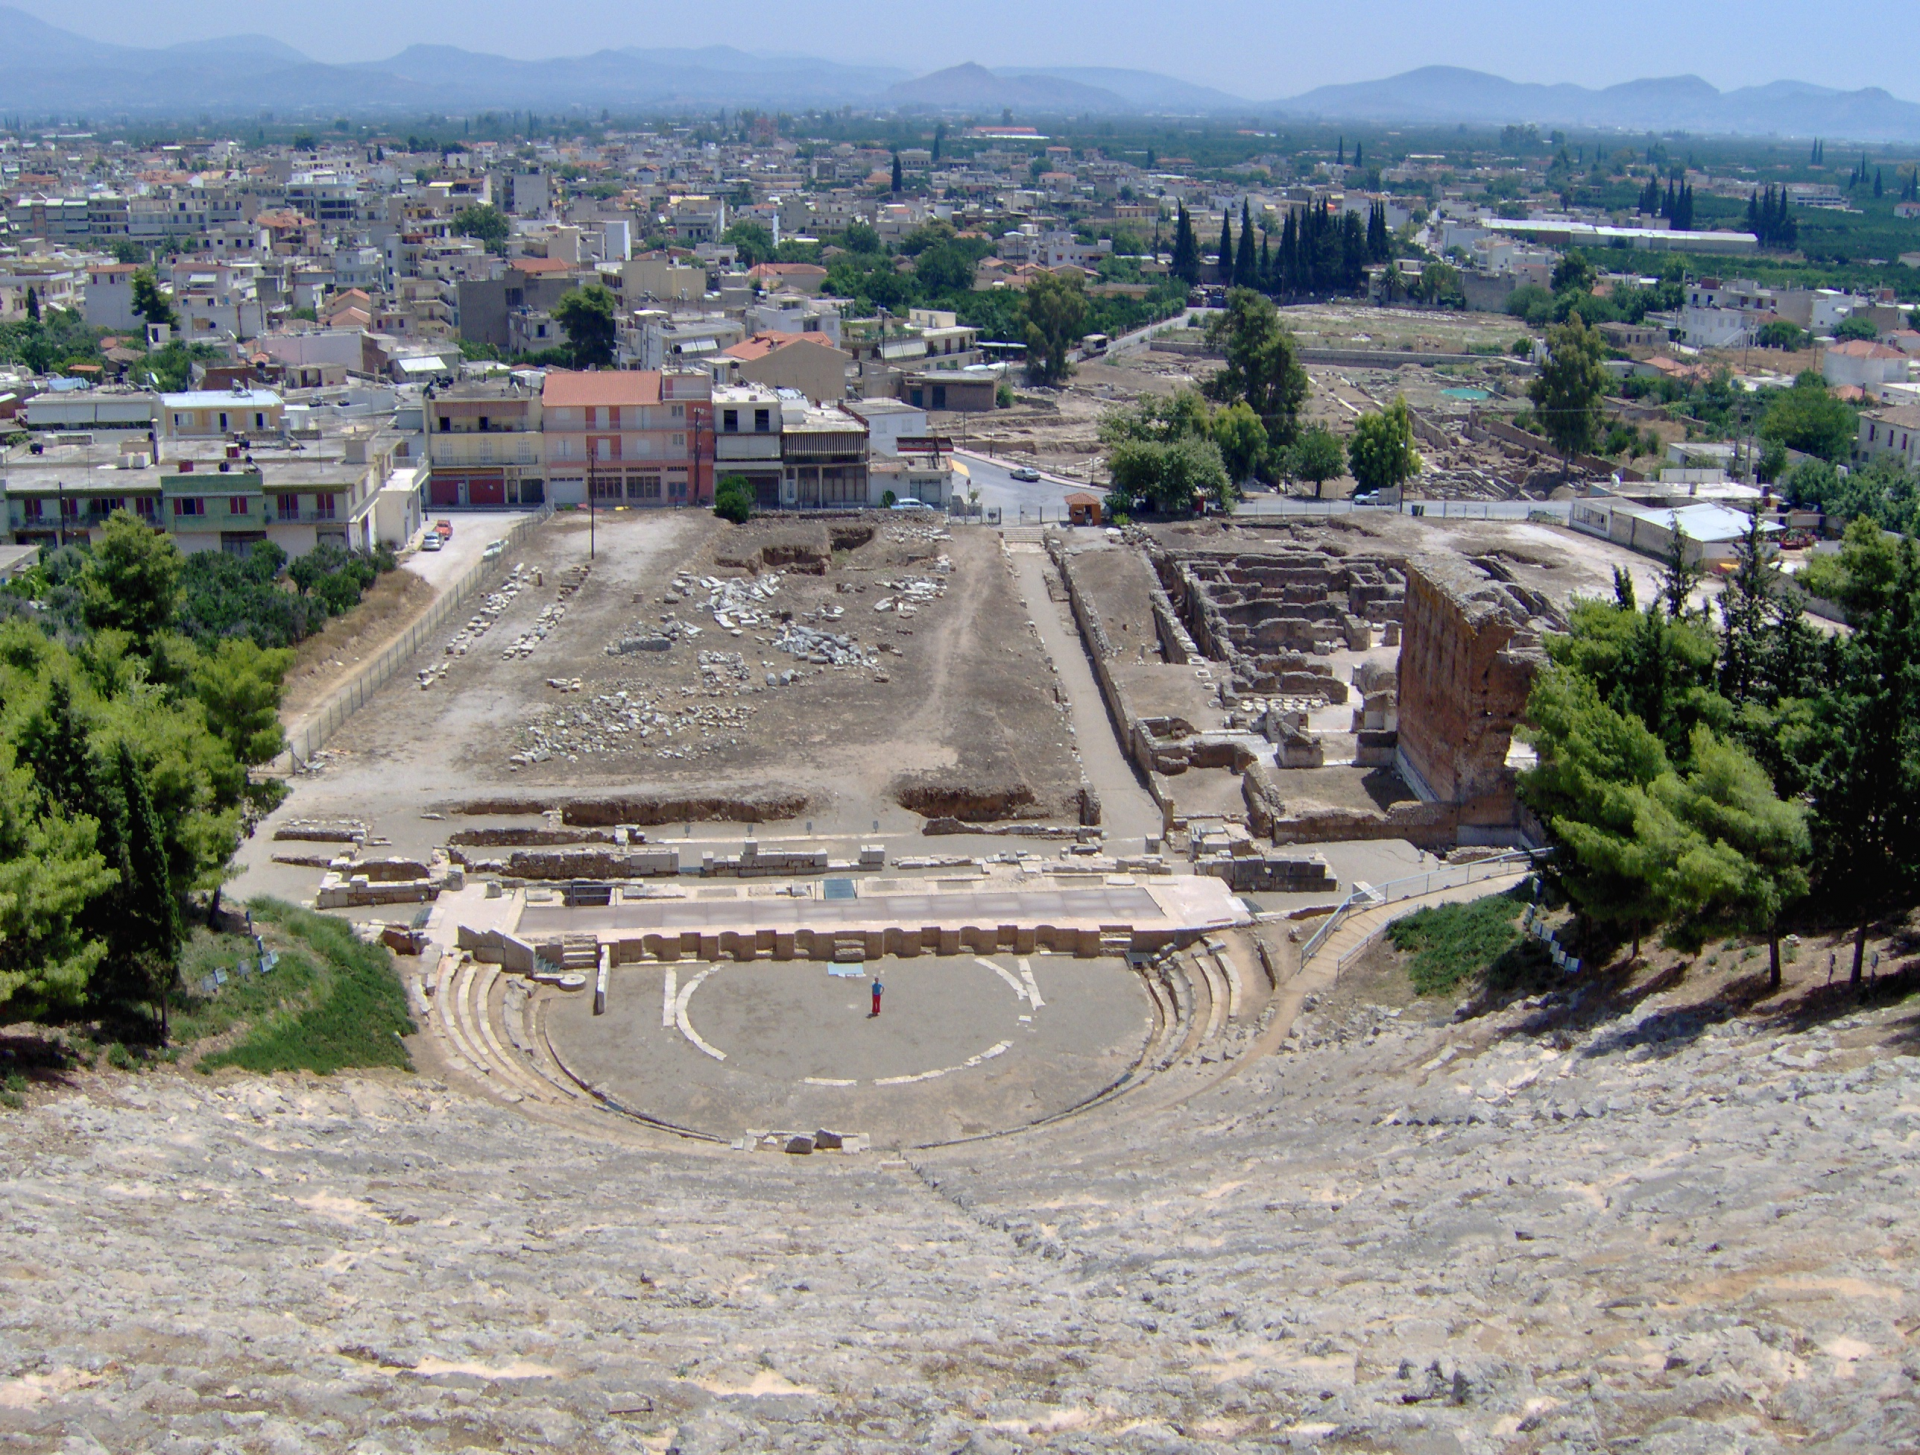 Facts about Argos - The Oldest City in Europe